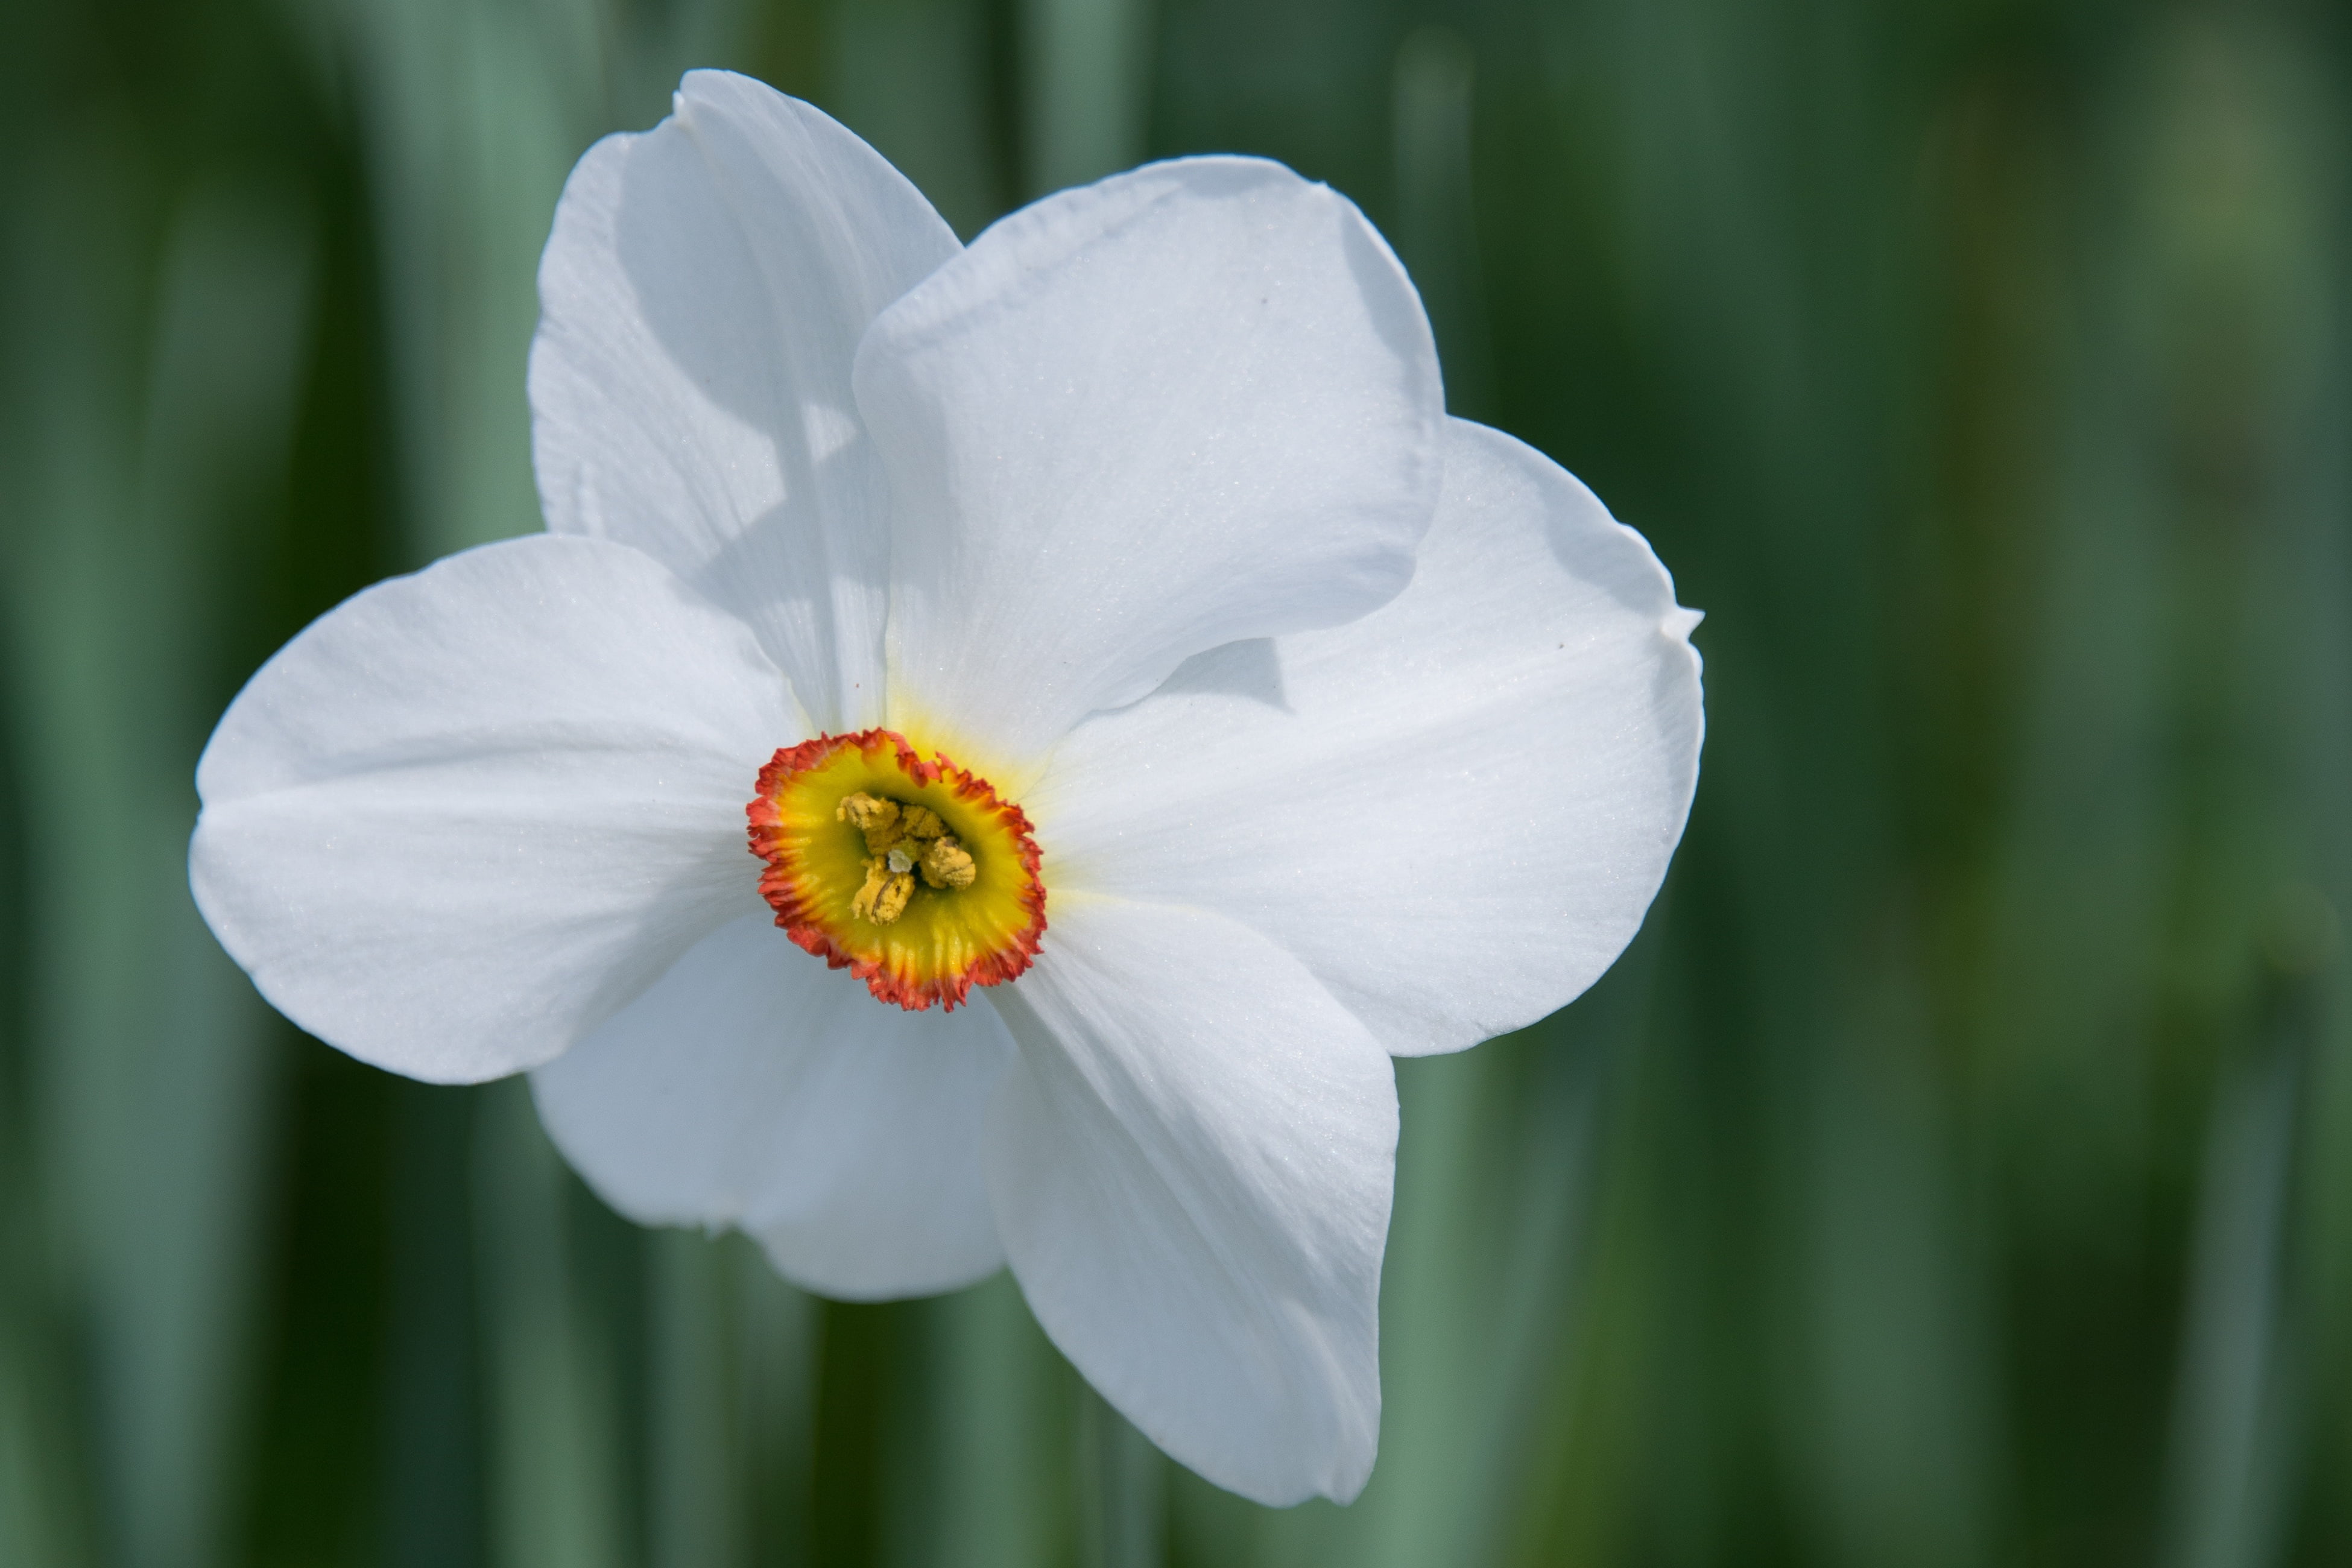 white and yellow Narcissus flower in close up photography